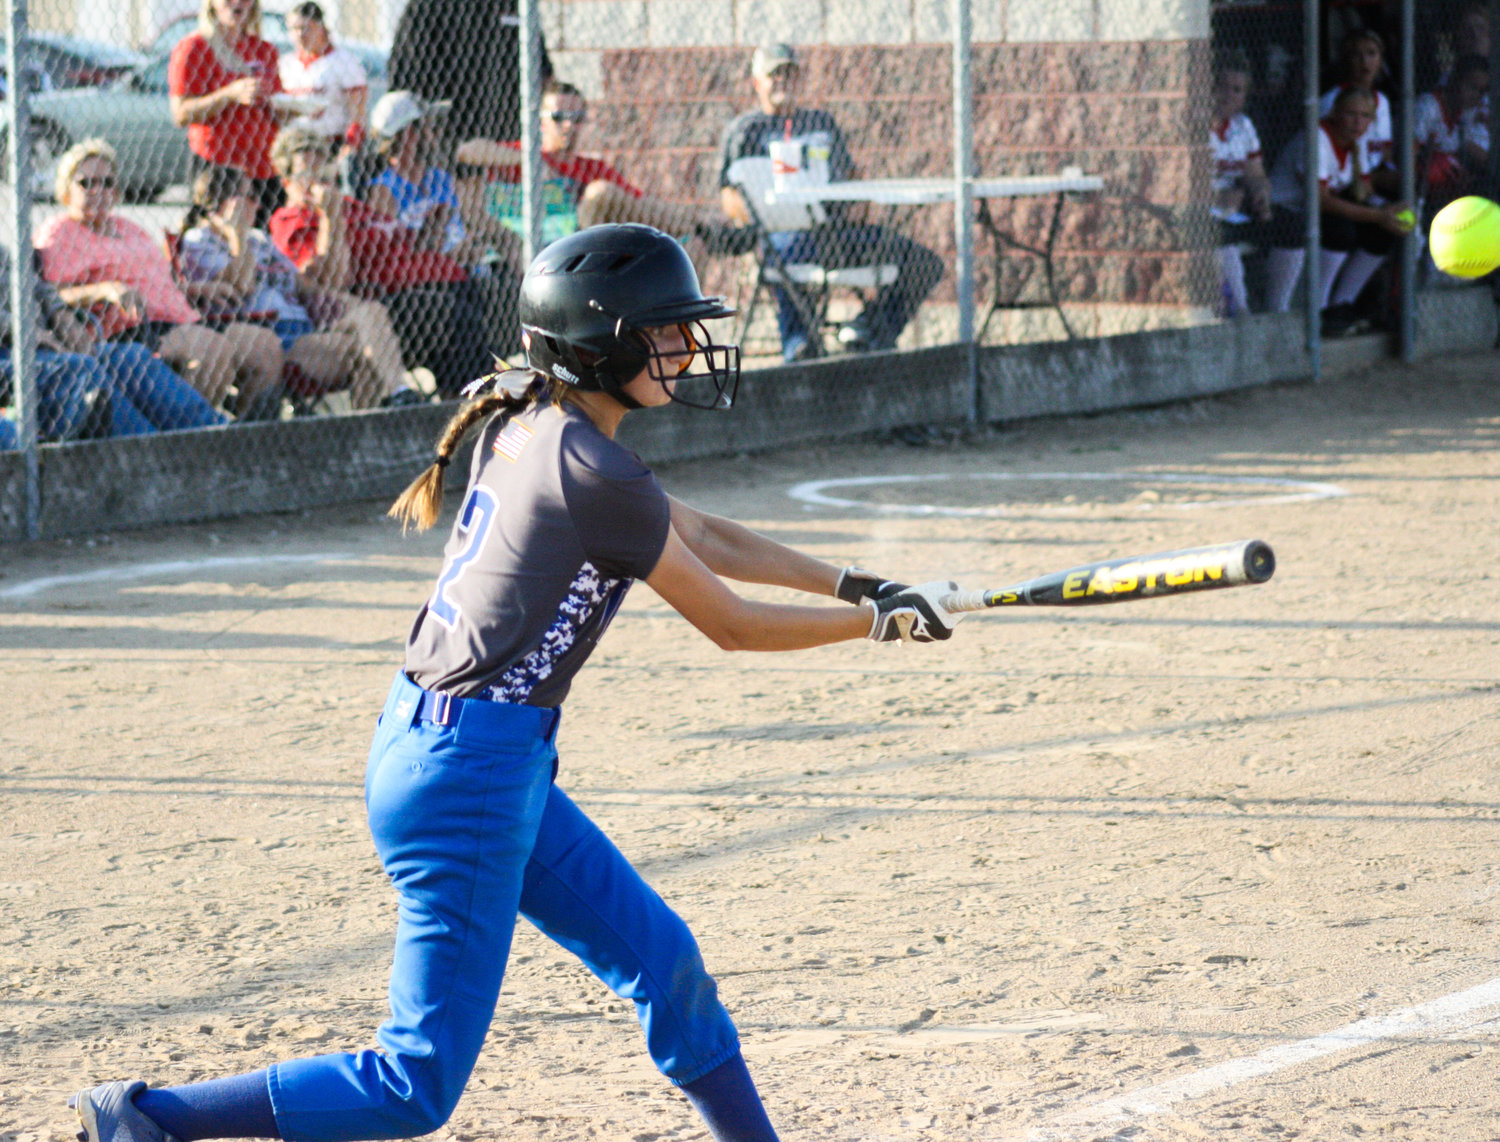 Paris freshman third baseman Sophia Crusha makes contact Sept. 14 against Community R-6 in Laddonia. Crusha had five RBI while going 4-for-7 for the runner-up Lady Coyotes at the North Shelby Tournament. She had a 5-for-5 night with three RBI in a 15-6 win at Bevier.